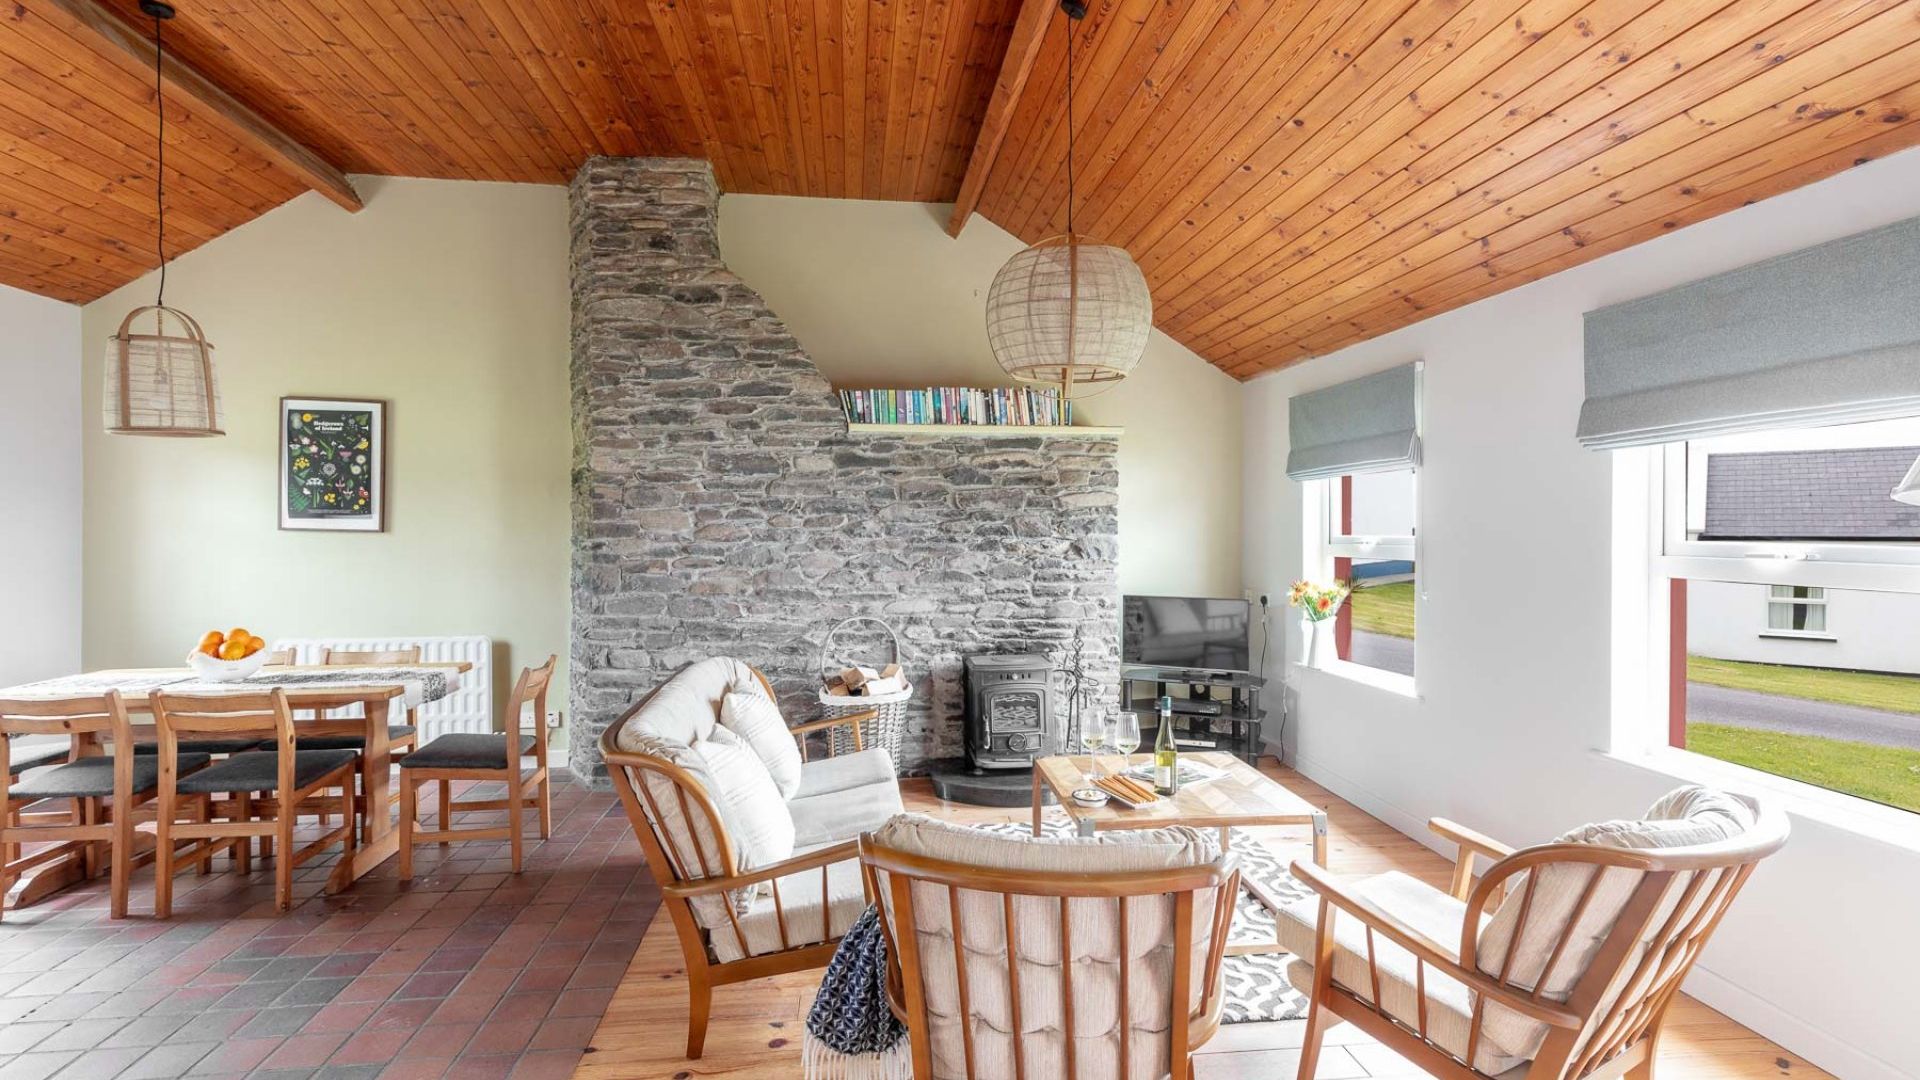 Ventry Beach Cottage - A stone’s throw to the beach photo 1